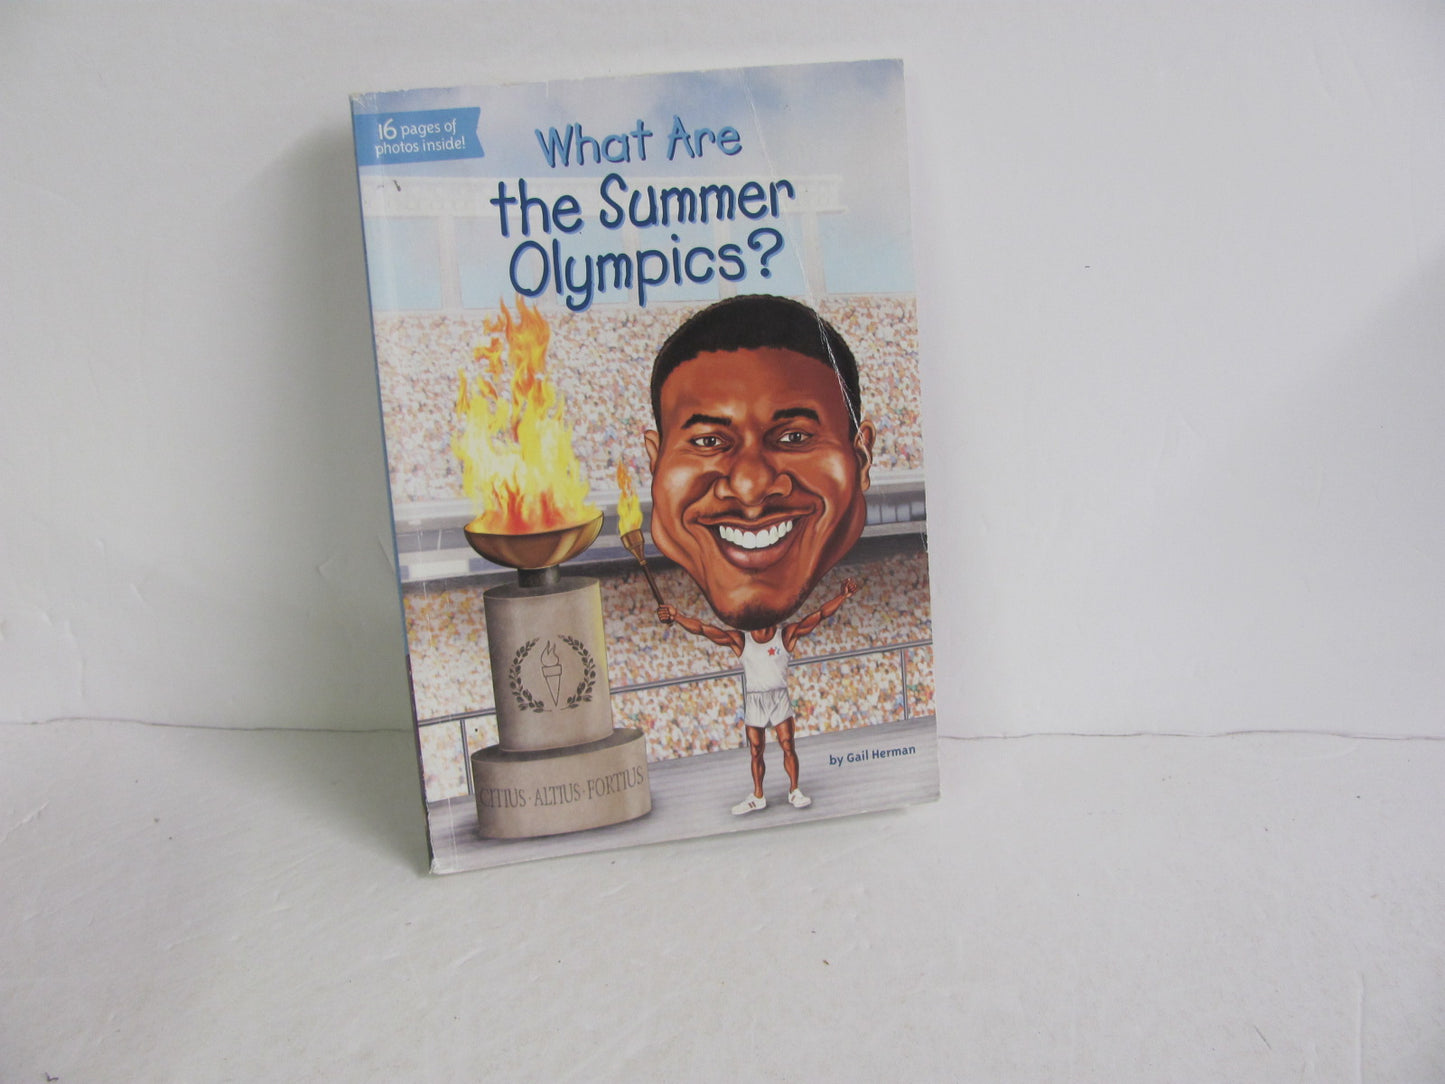 What Are the Summer Olympics? Whohq Pre-Owned Herman Fiction Books